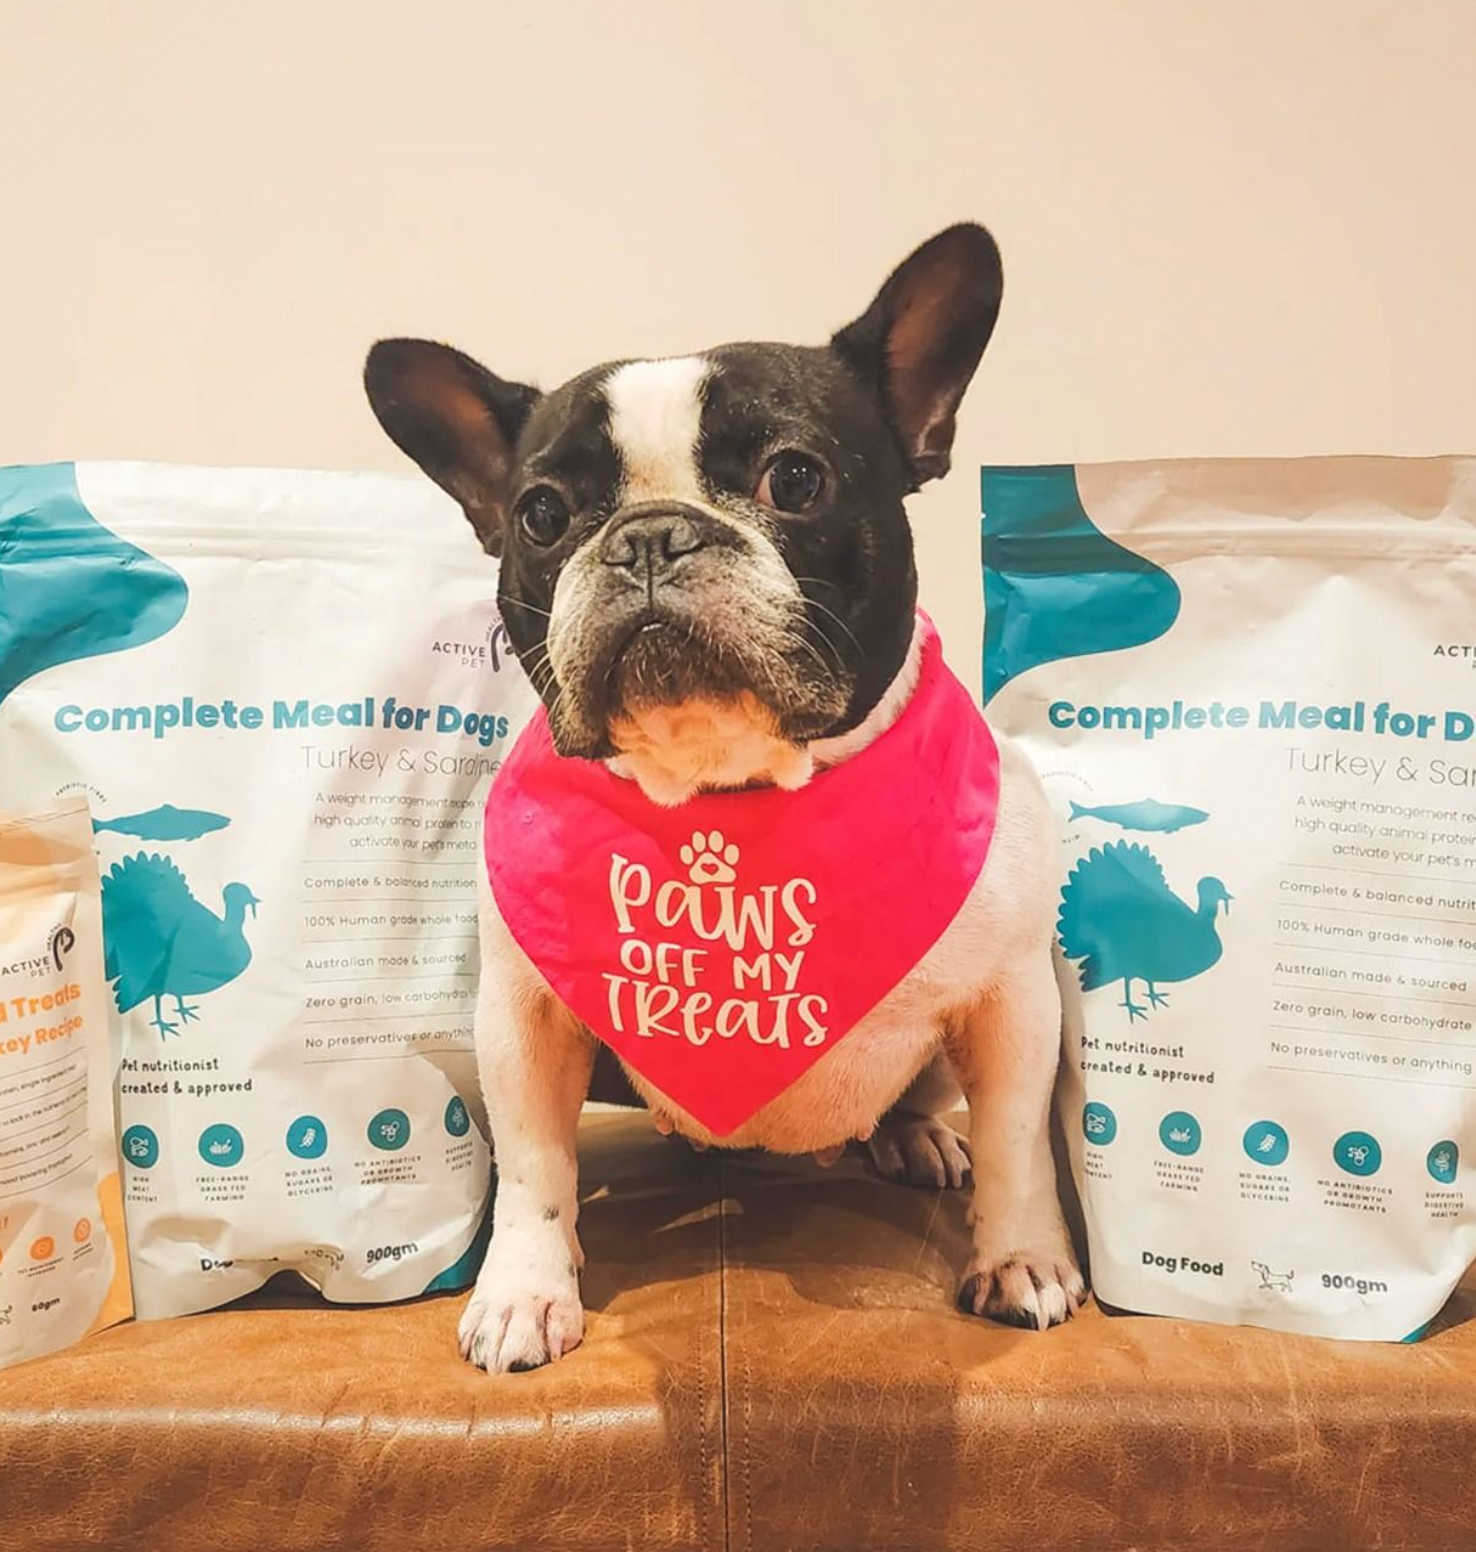 Premium air and freeze dried dog food